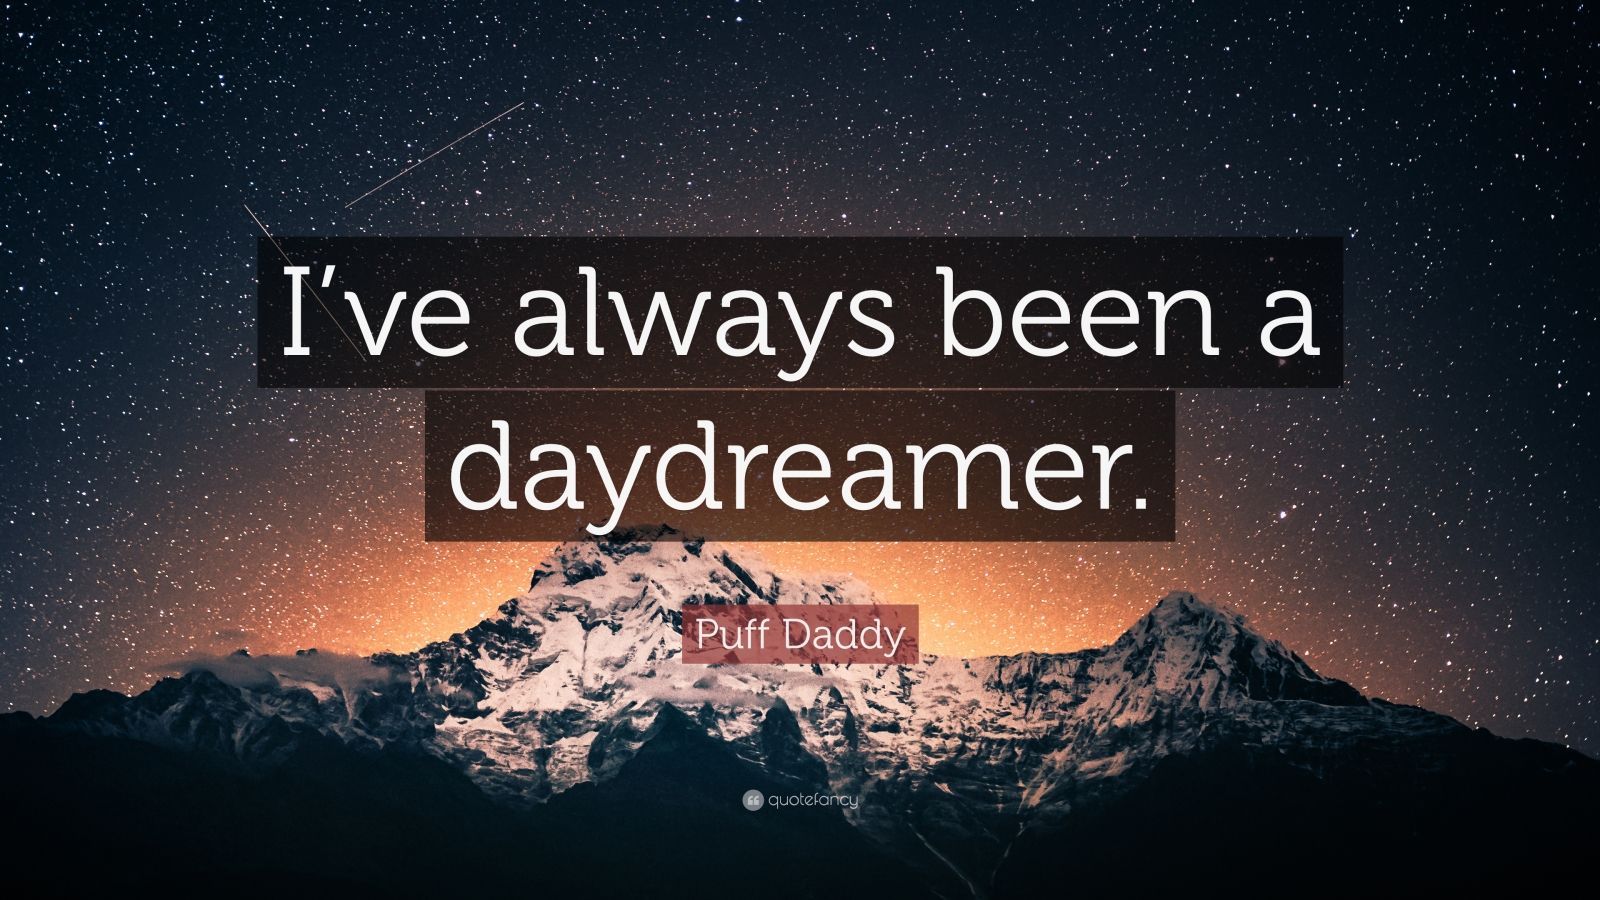 Puff Daddy Quote: “I've always been a daydreamer.” (7 wallpaper)